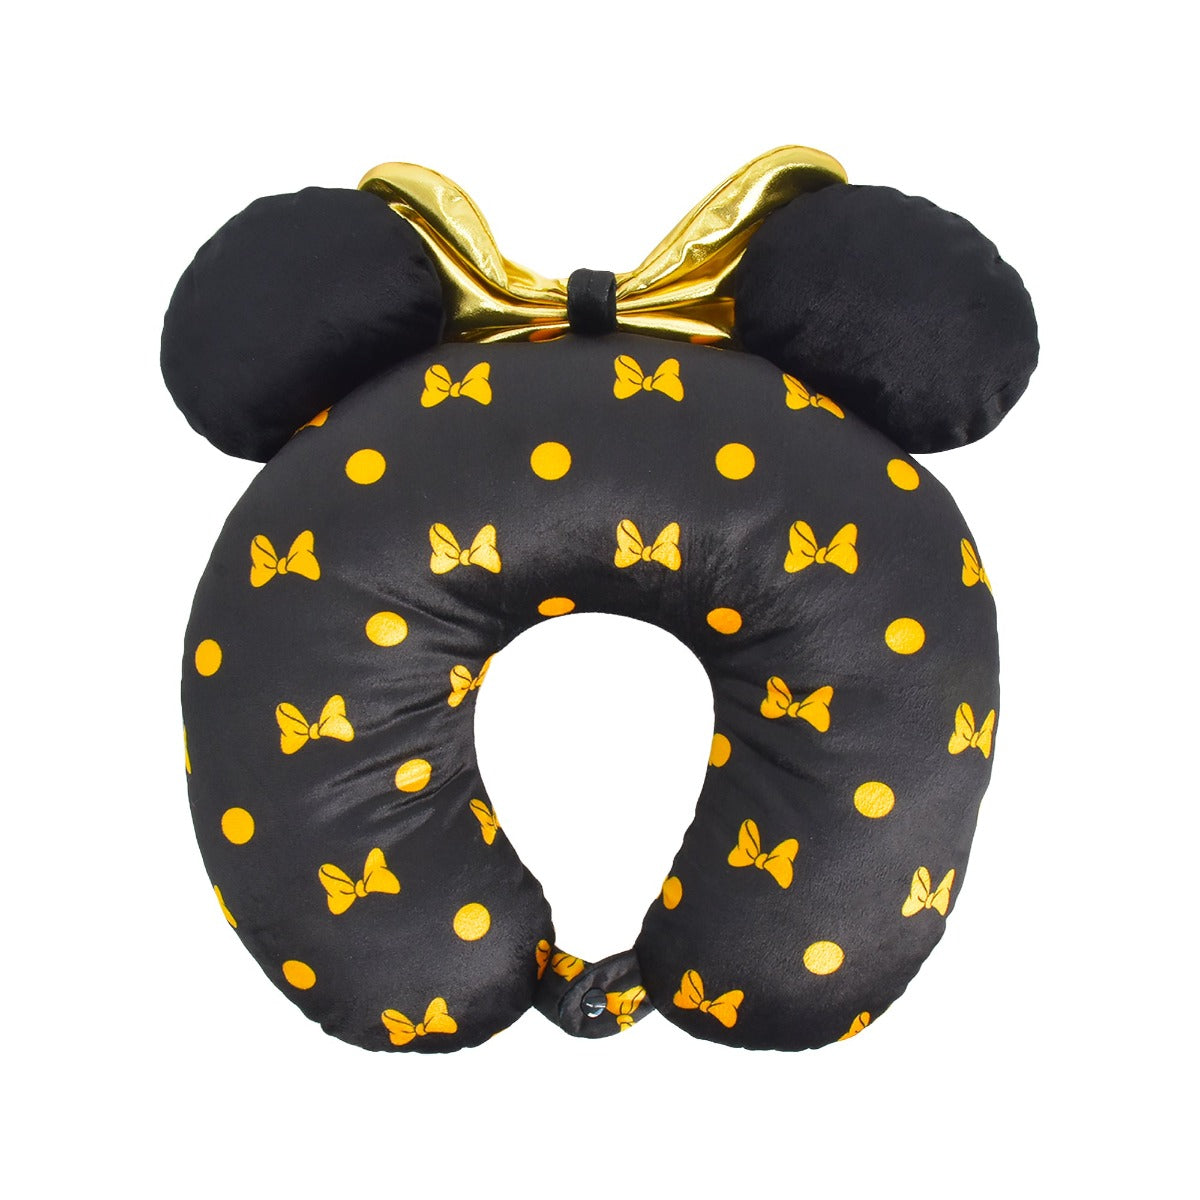 Disney Minnie Mouse black and gold with 3D ears and bow - best travel neck pillow